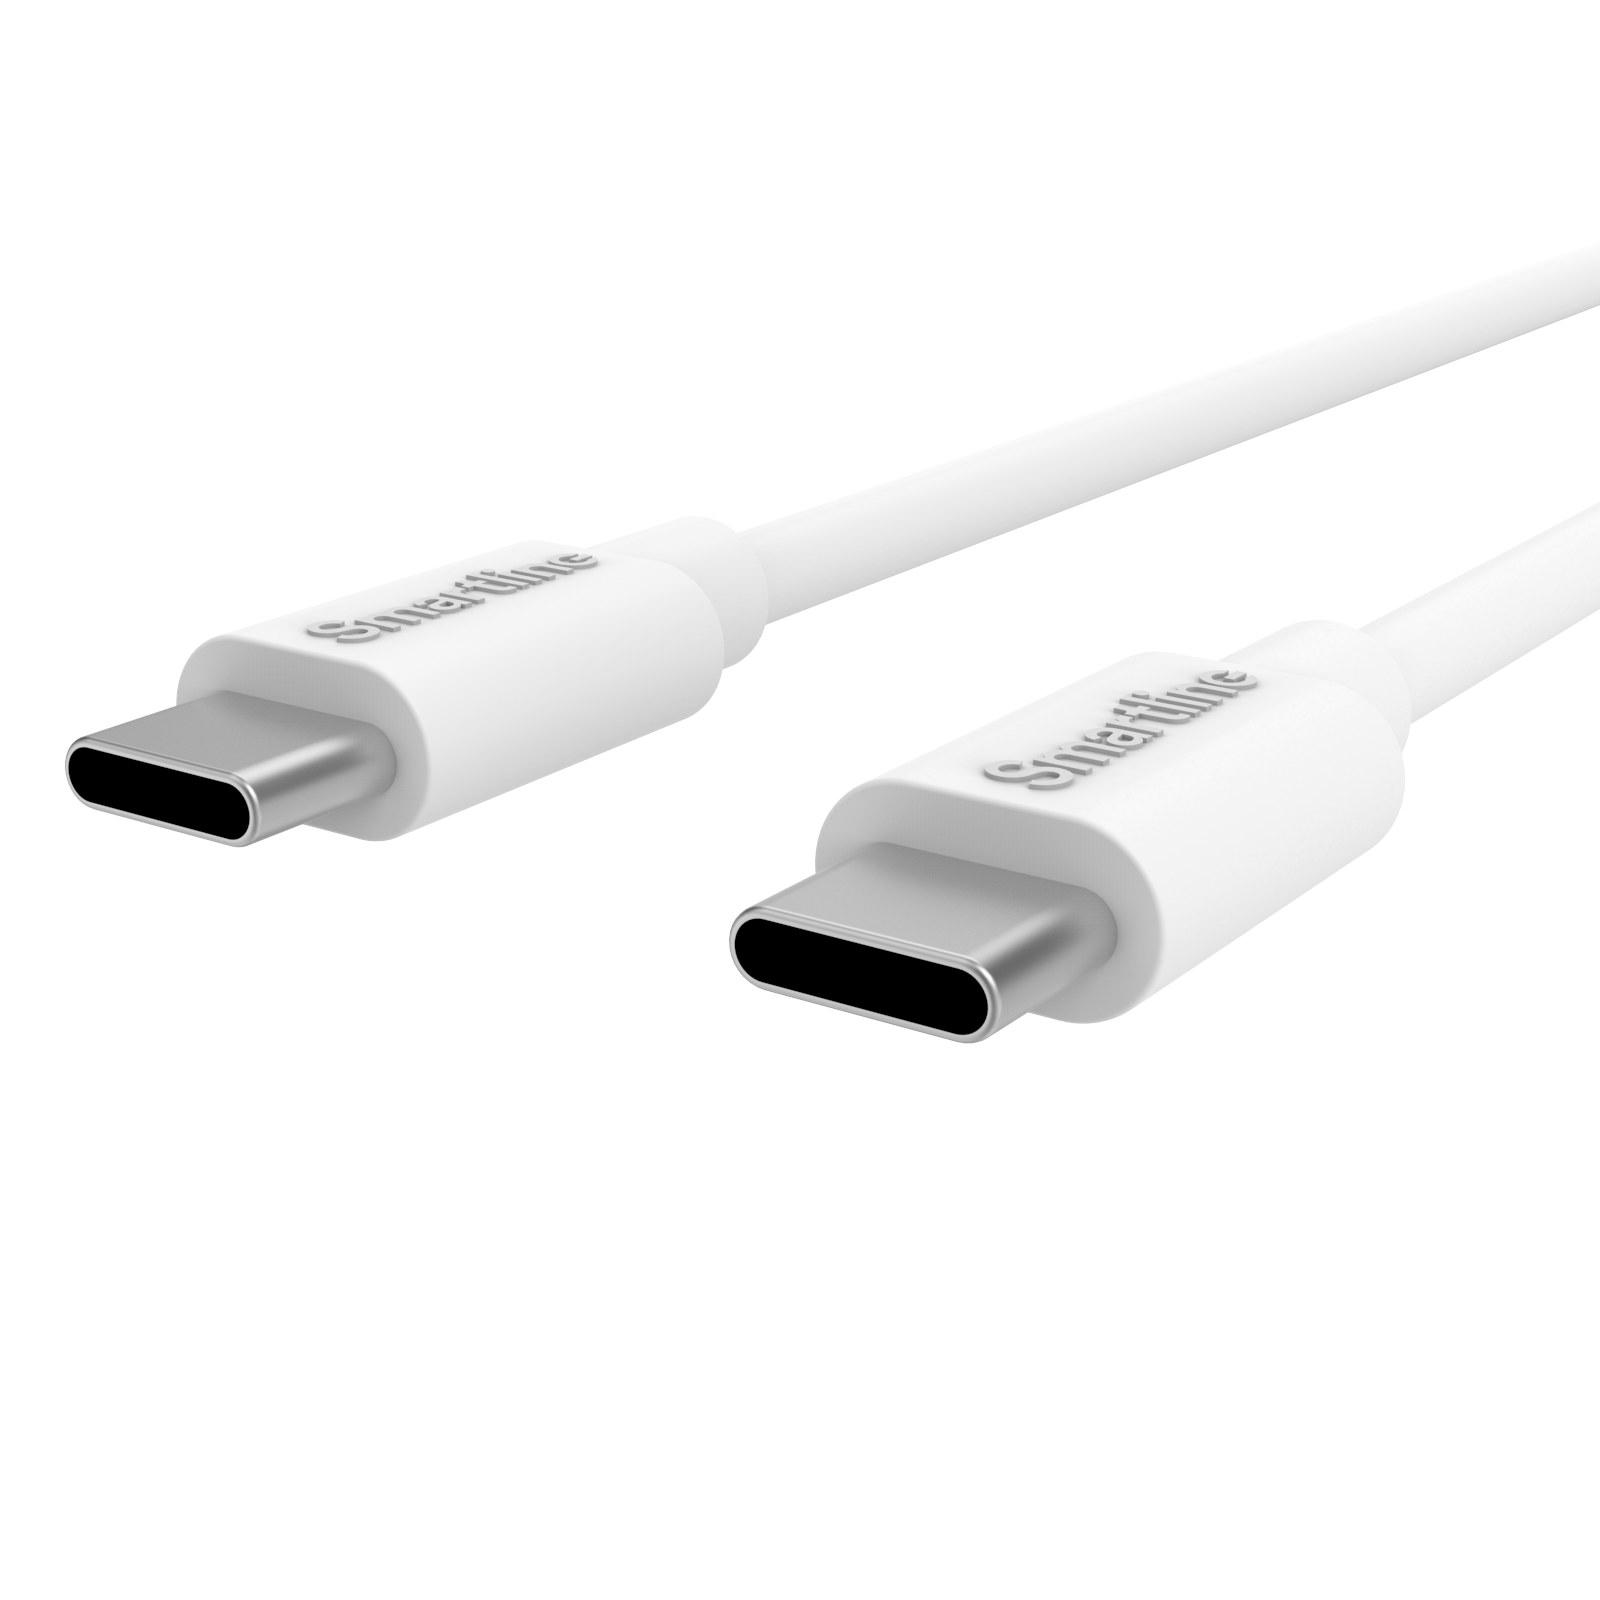 Complete Charger Samsung Galaxy A32 - 2 meter Cable and Wall Charger USB-C - Smartline